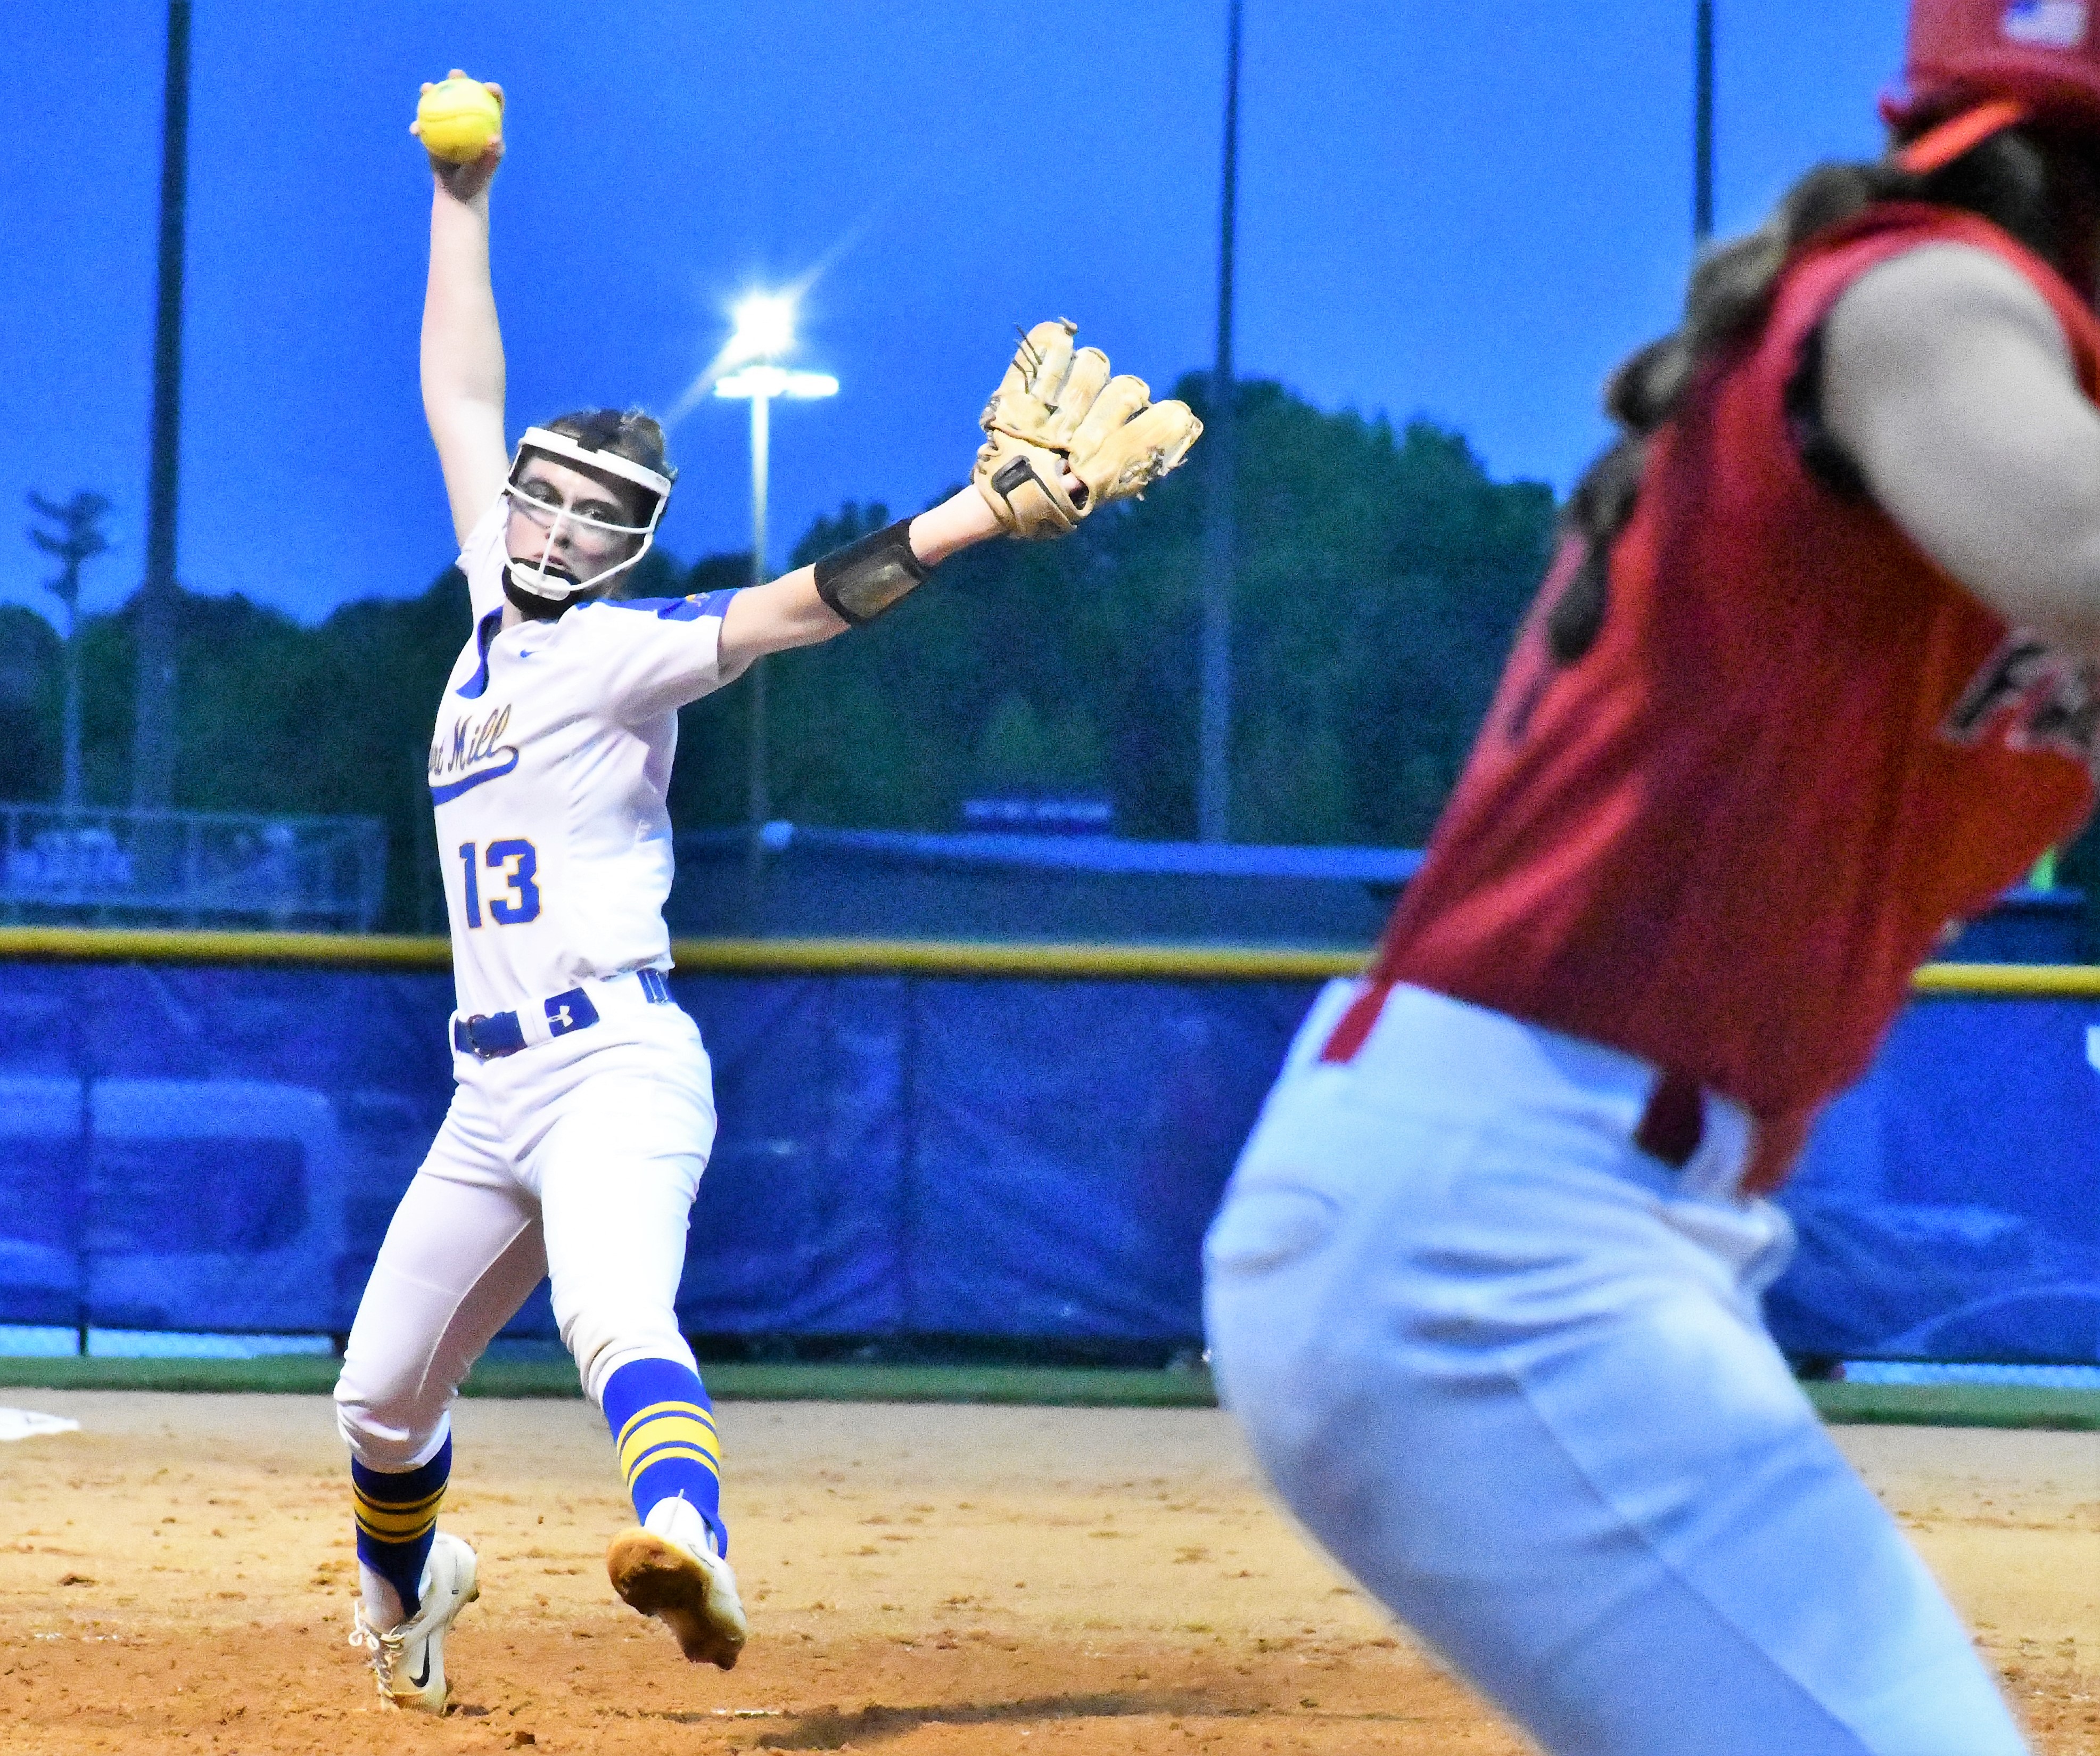 Fort Mill softball wins in extra innings over Nation Ford